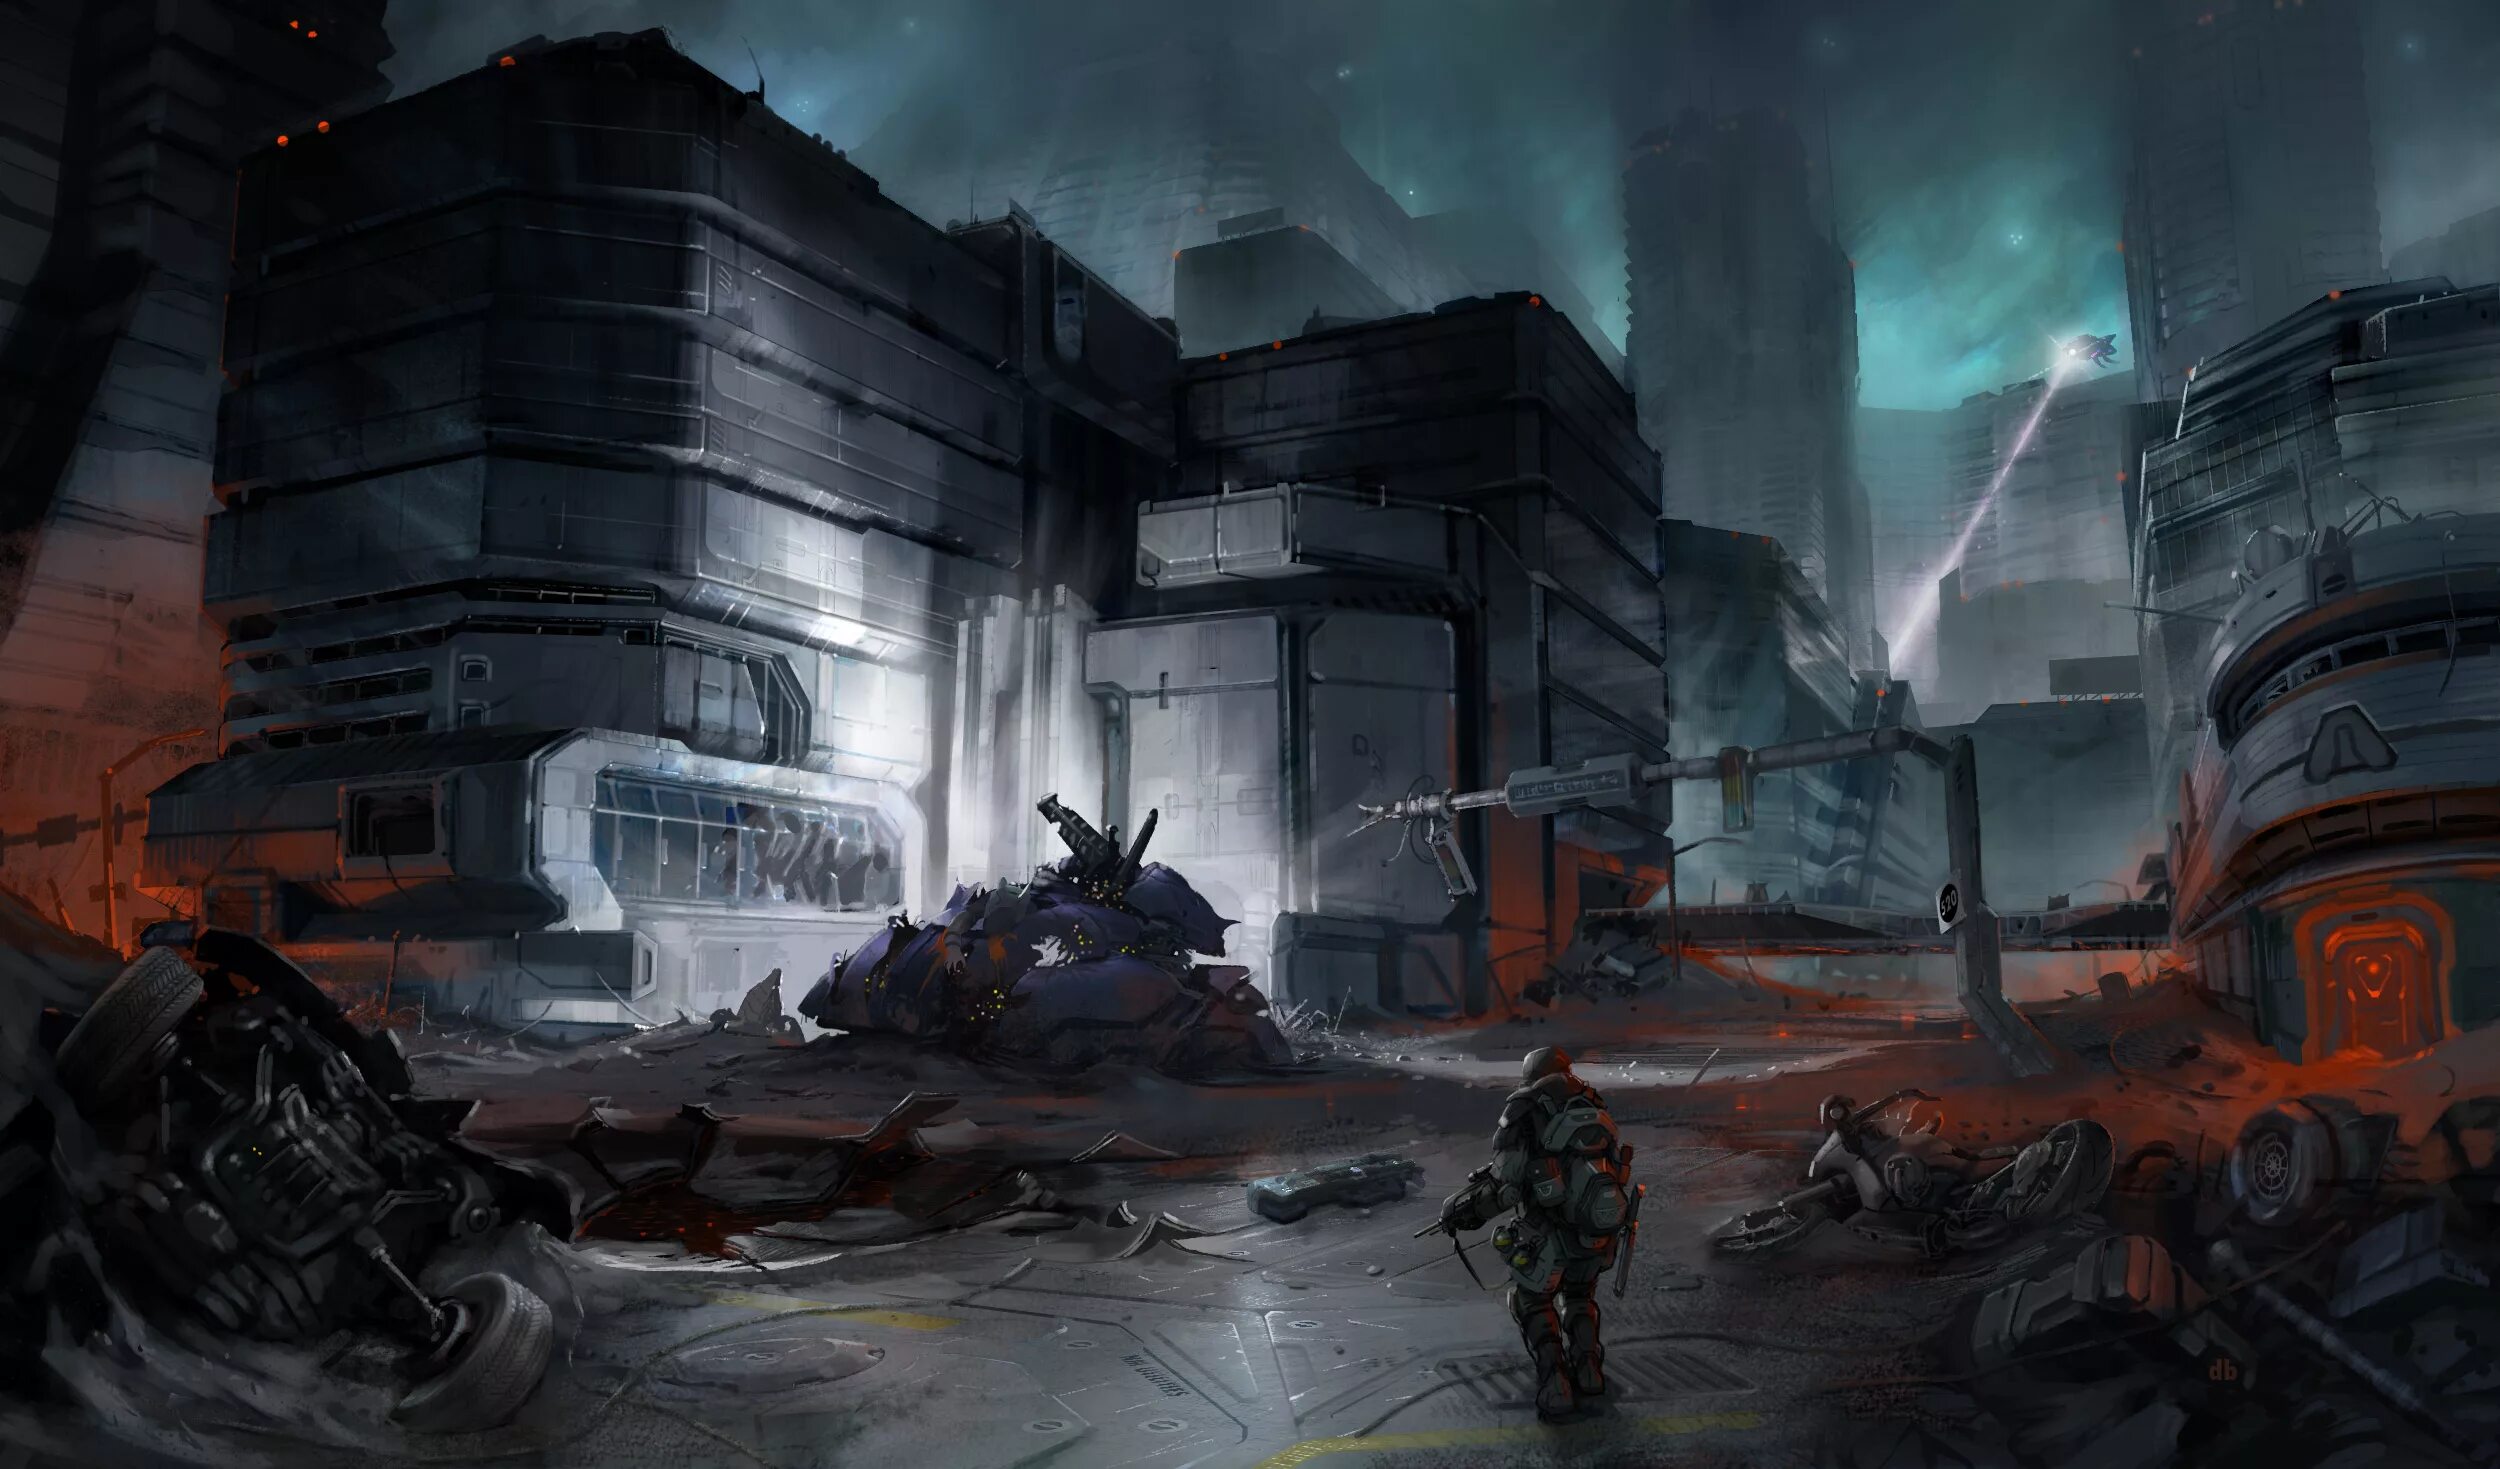 Sci fi games. Halo 3 ODST арт. Halo 3 ODST New Mombasa Art. Halo ODST Art. Нью Момбаса Halo.